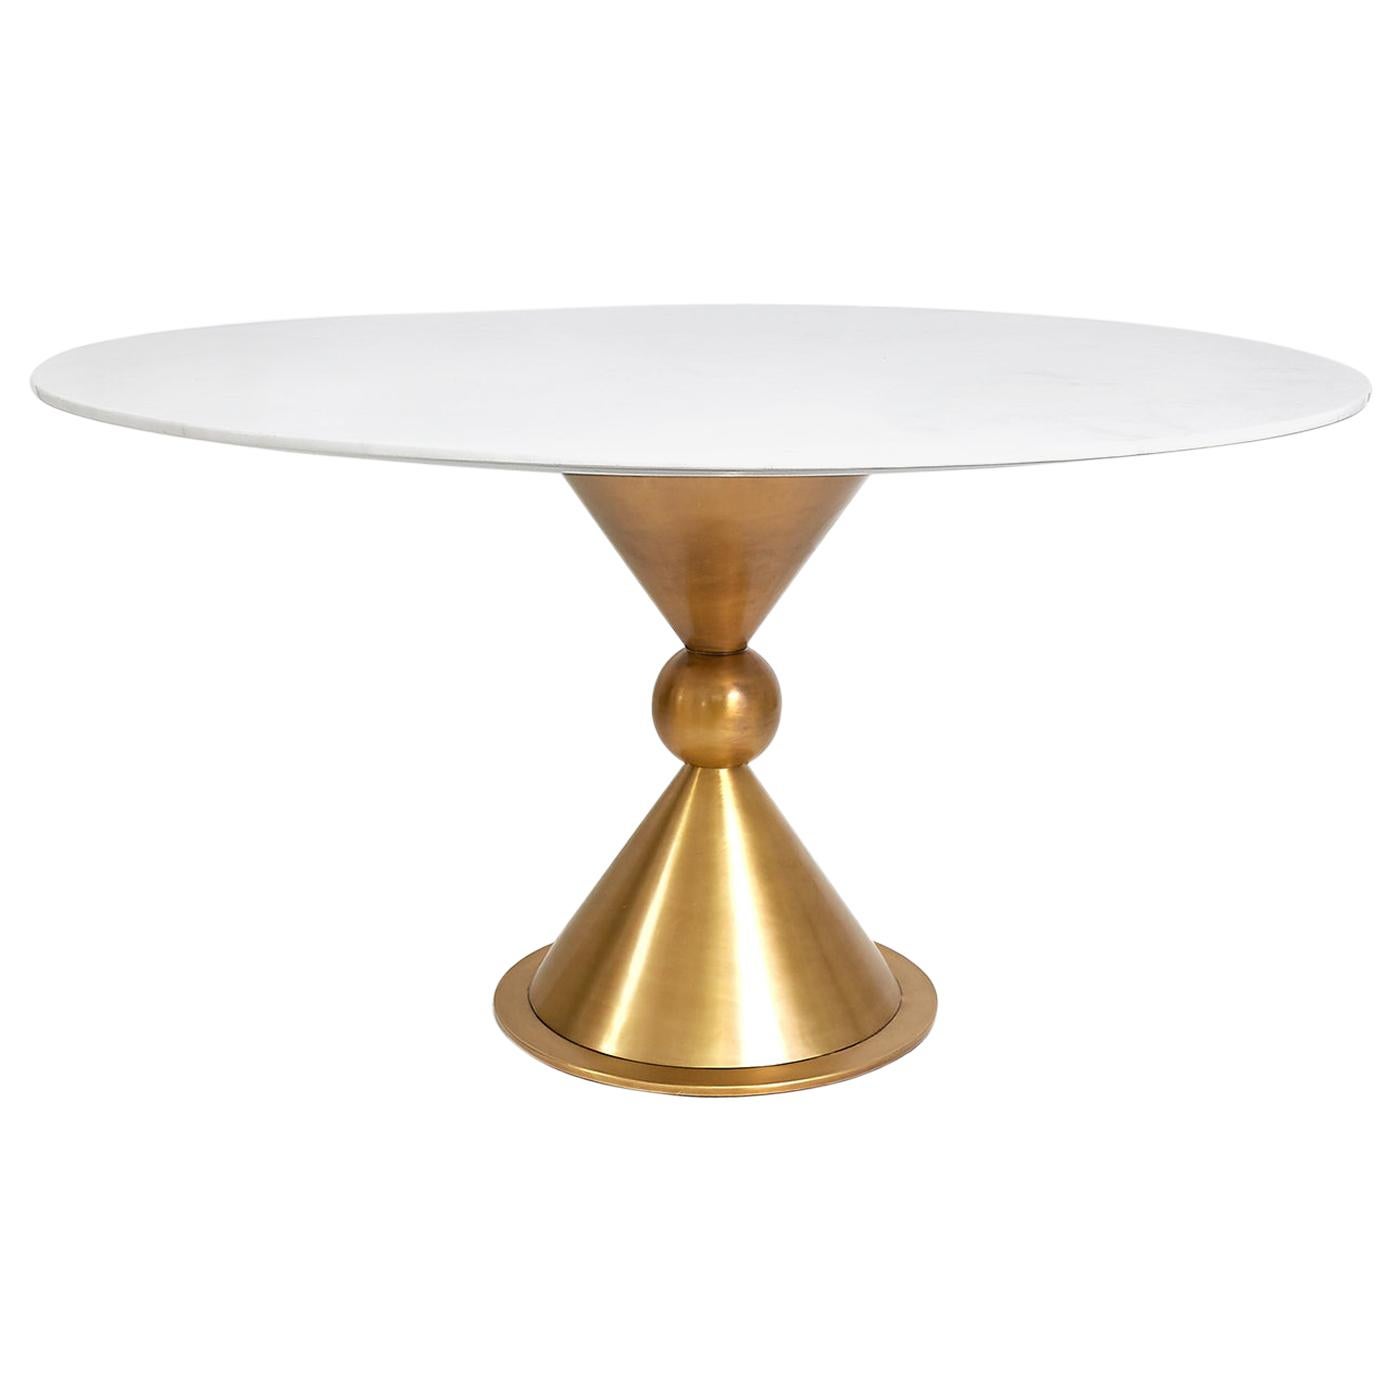 Caracas Brass and White Marble Dining Table